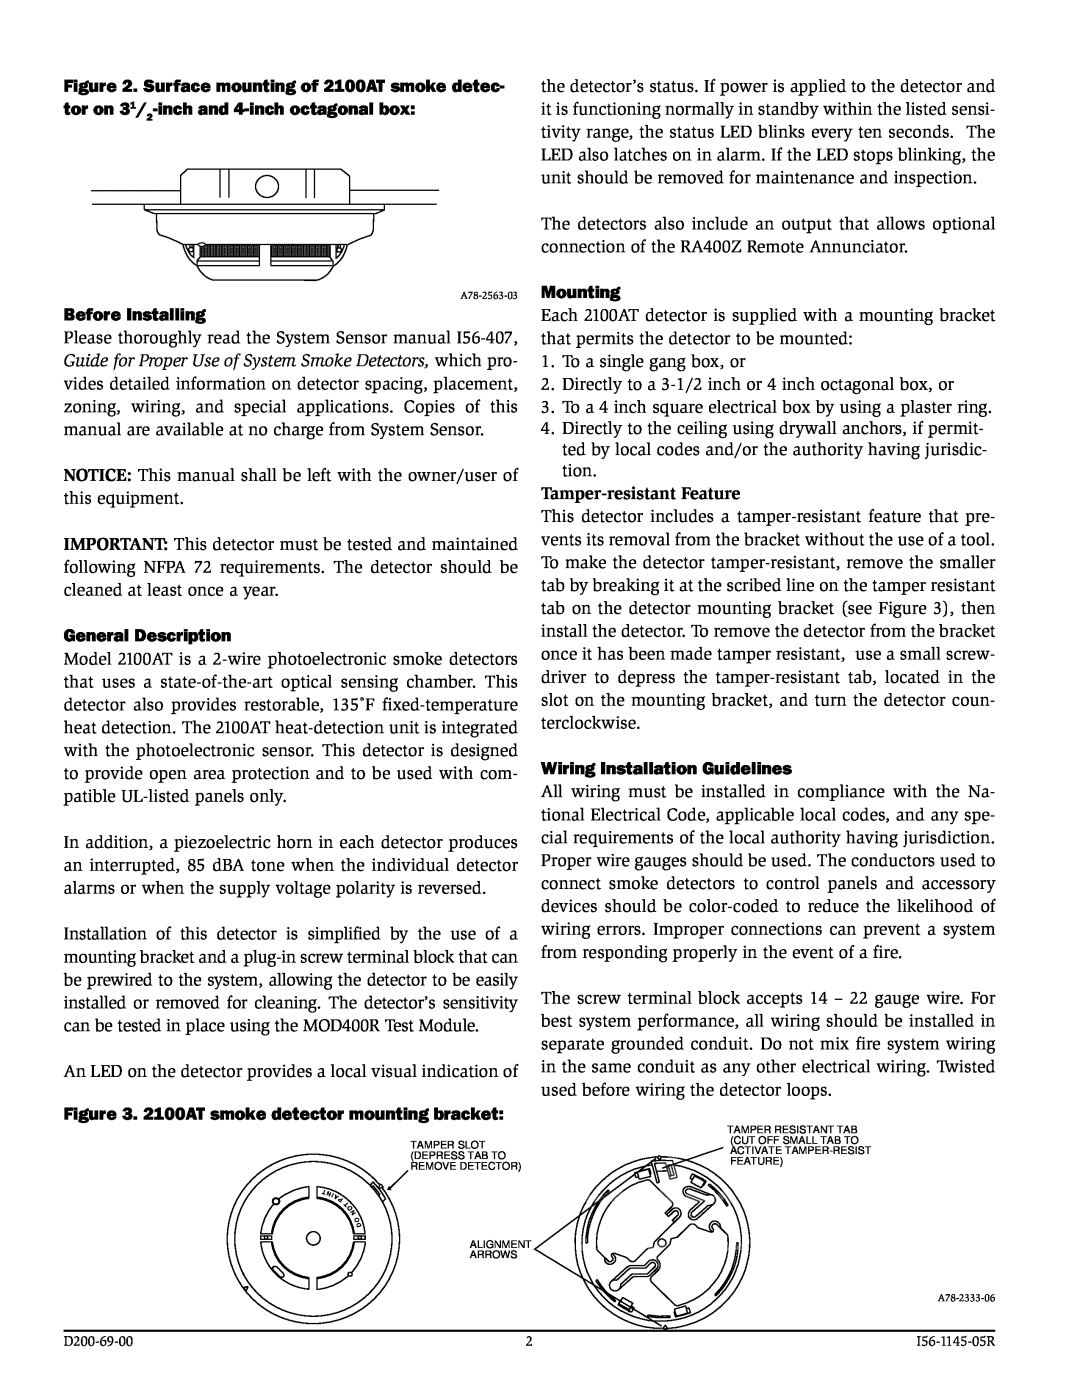 System Sensor 2100AT specifications Before Installing, General Description, Mounting, Wiring Installation Guidelines 